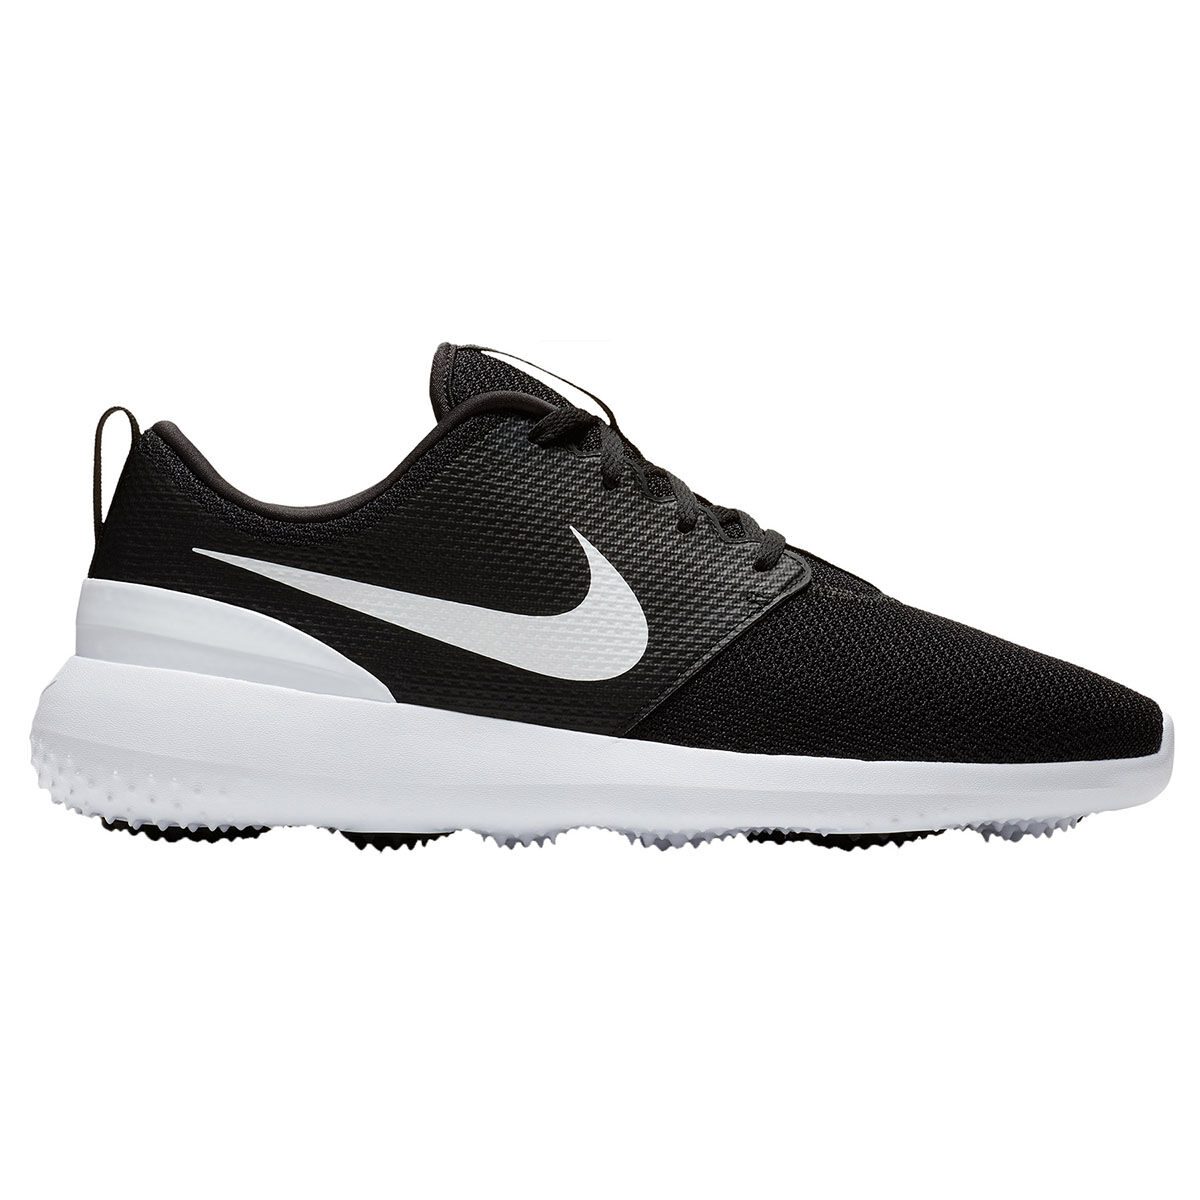 Nike Golf Roshe G Shoes from american golf